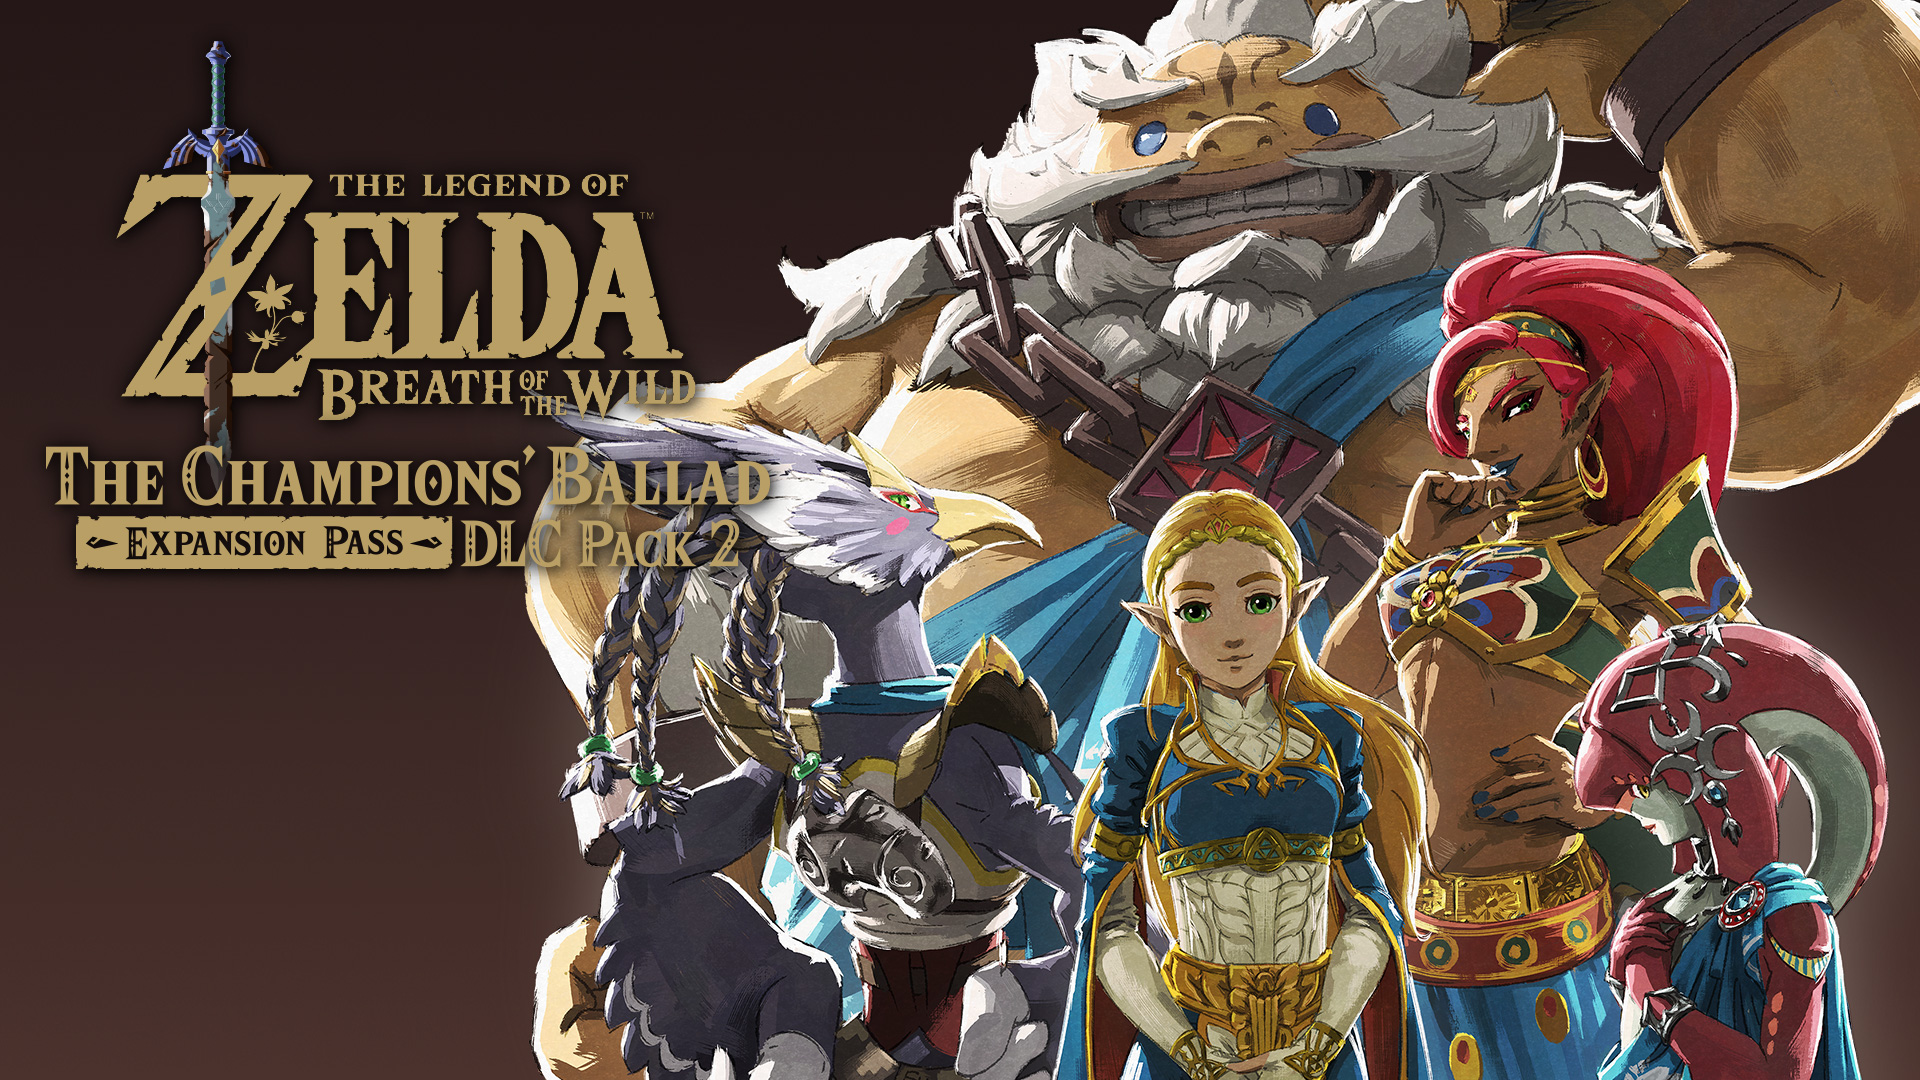 zelda breath of the wild expansion pass